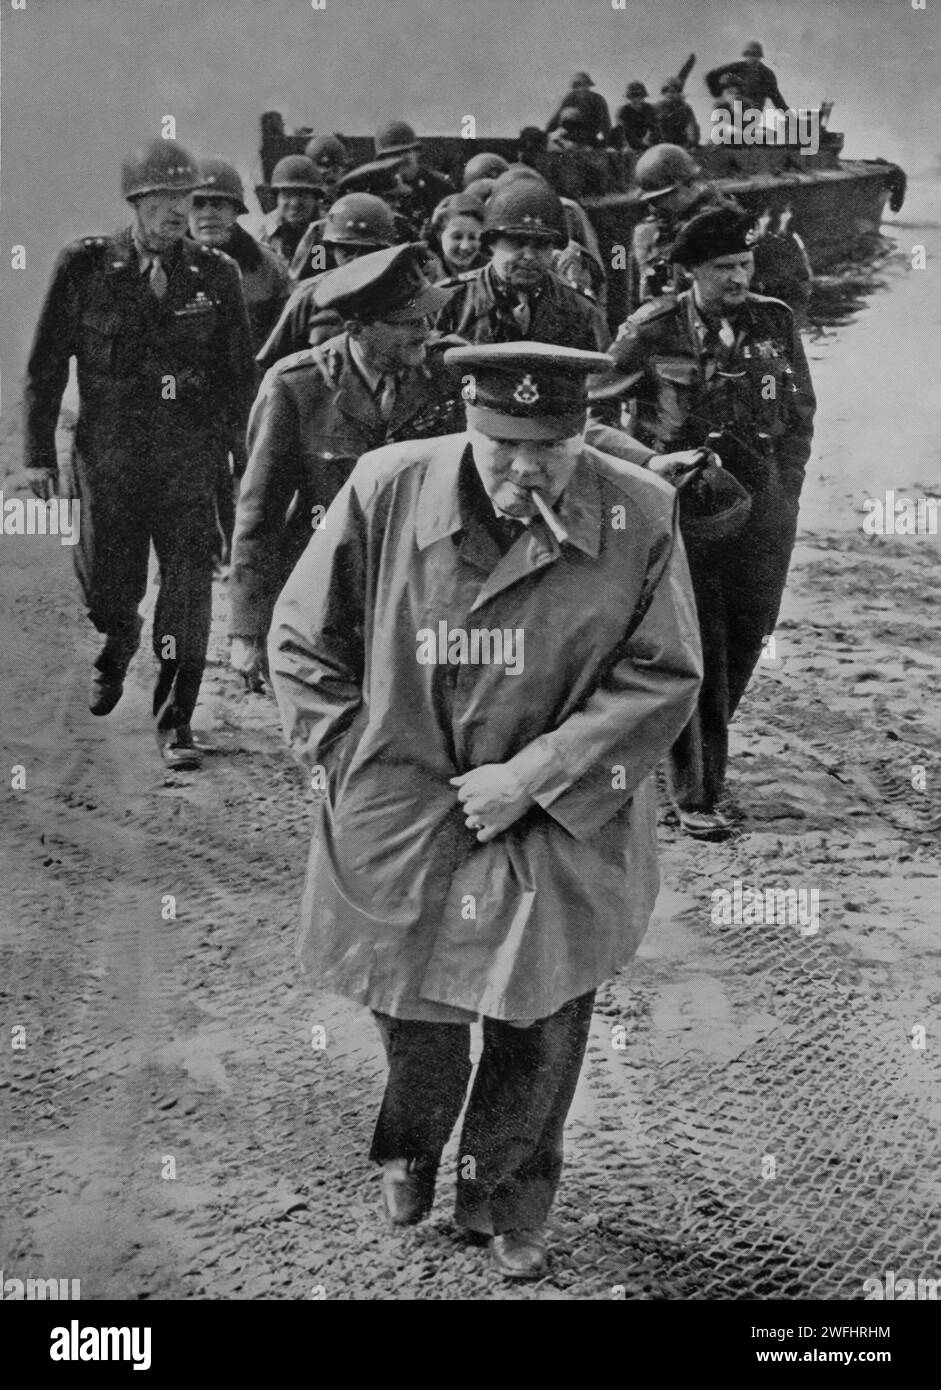 On the 25th March 1945, Prime Minister Winston Churchill along with General Mongomery crossed the River Rhine, Germany on a landing craft during the final days of the Second World War in Europe. Stock Photo